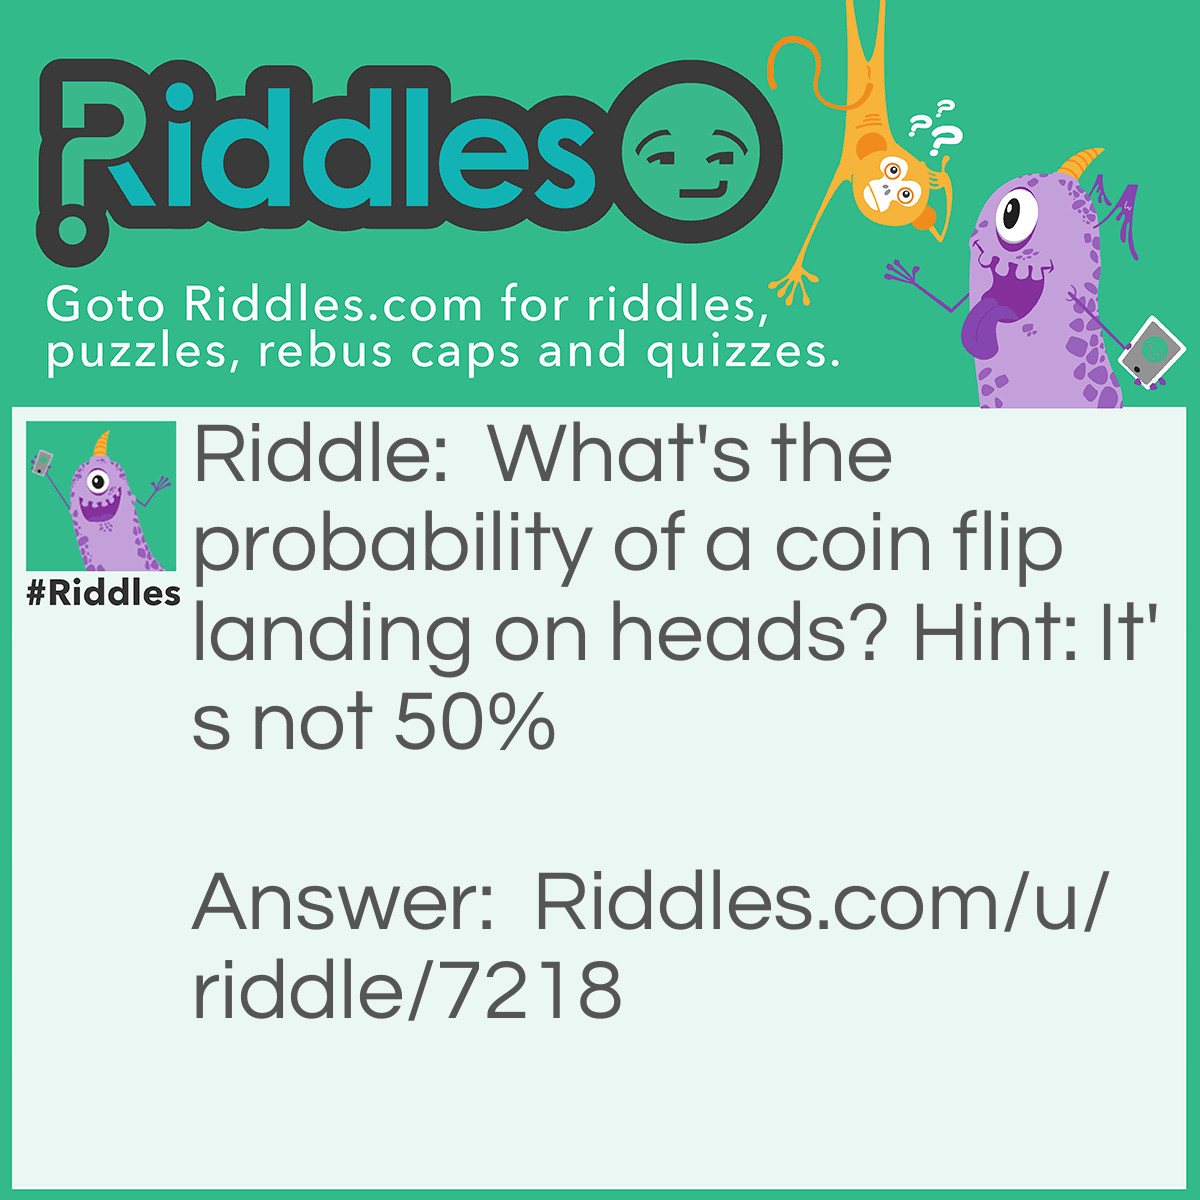 Riddle: What's the probability of a coin flip landing on heads? Hint: It's not 50% Answer: It's very close to 50%, but it's actually just a bit less. The coin still has a chance of landing on it's edge.